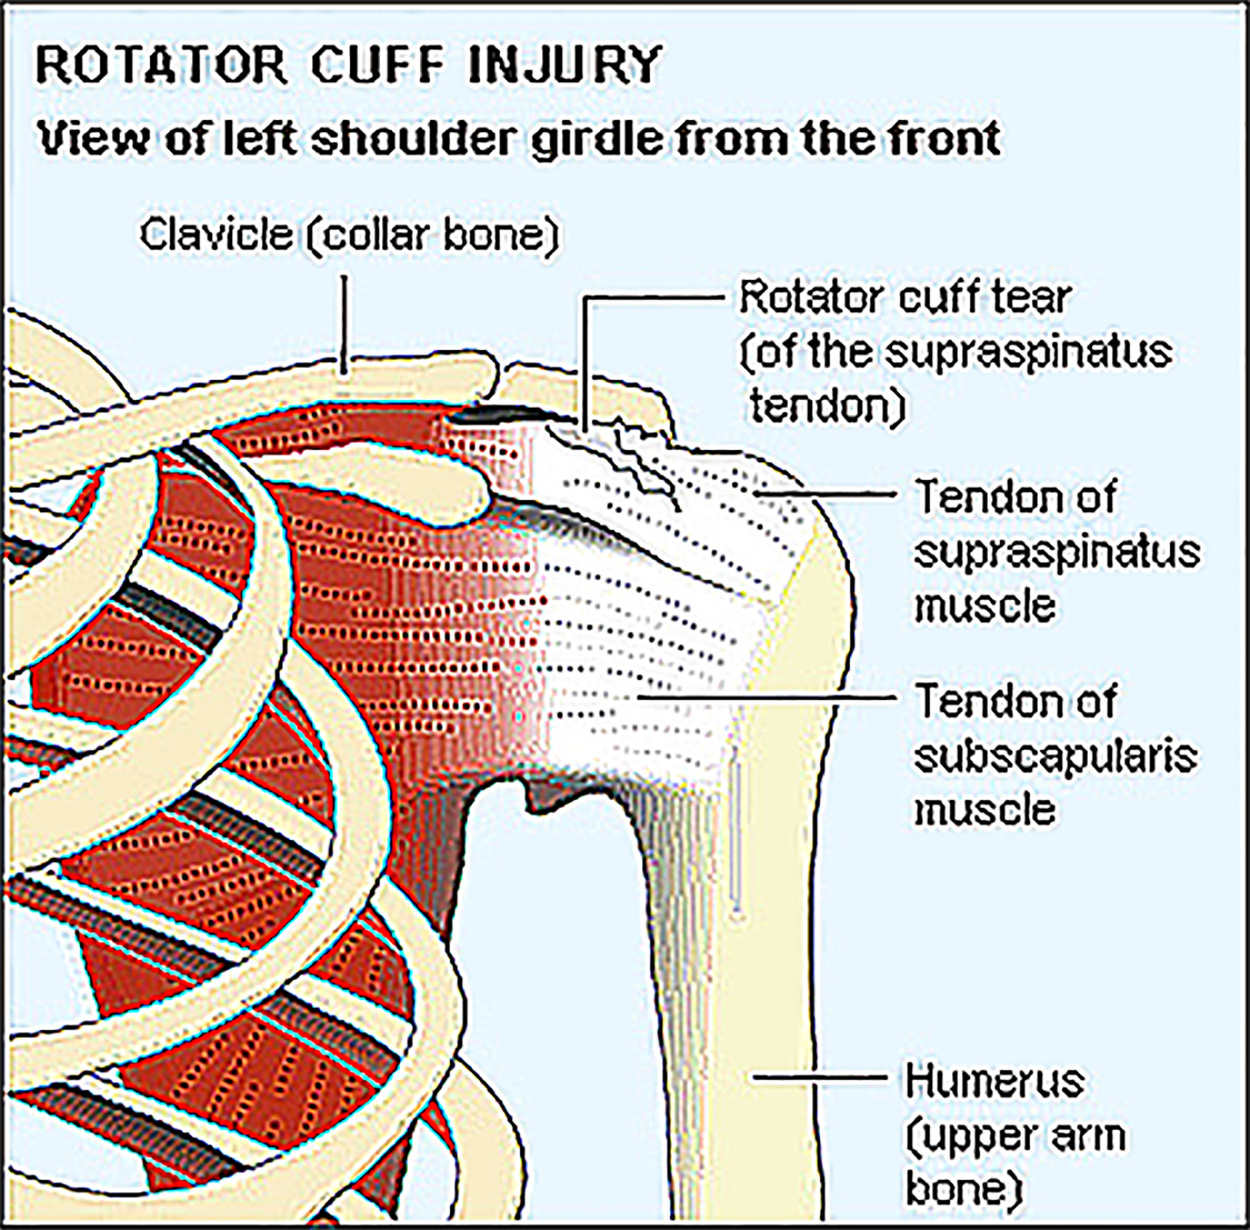 https://dynamicphysiotherapy.ca/wp-content/uploads/2019/08/Rotator-Cuff-21.jpg